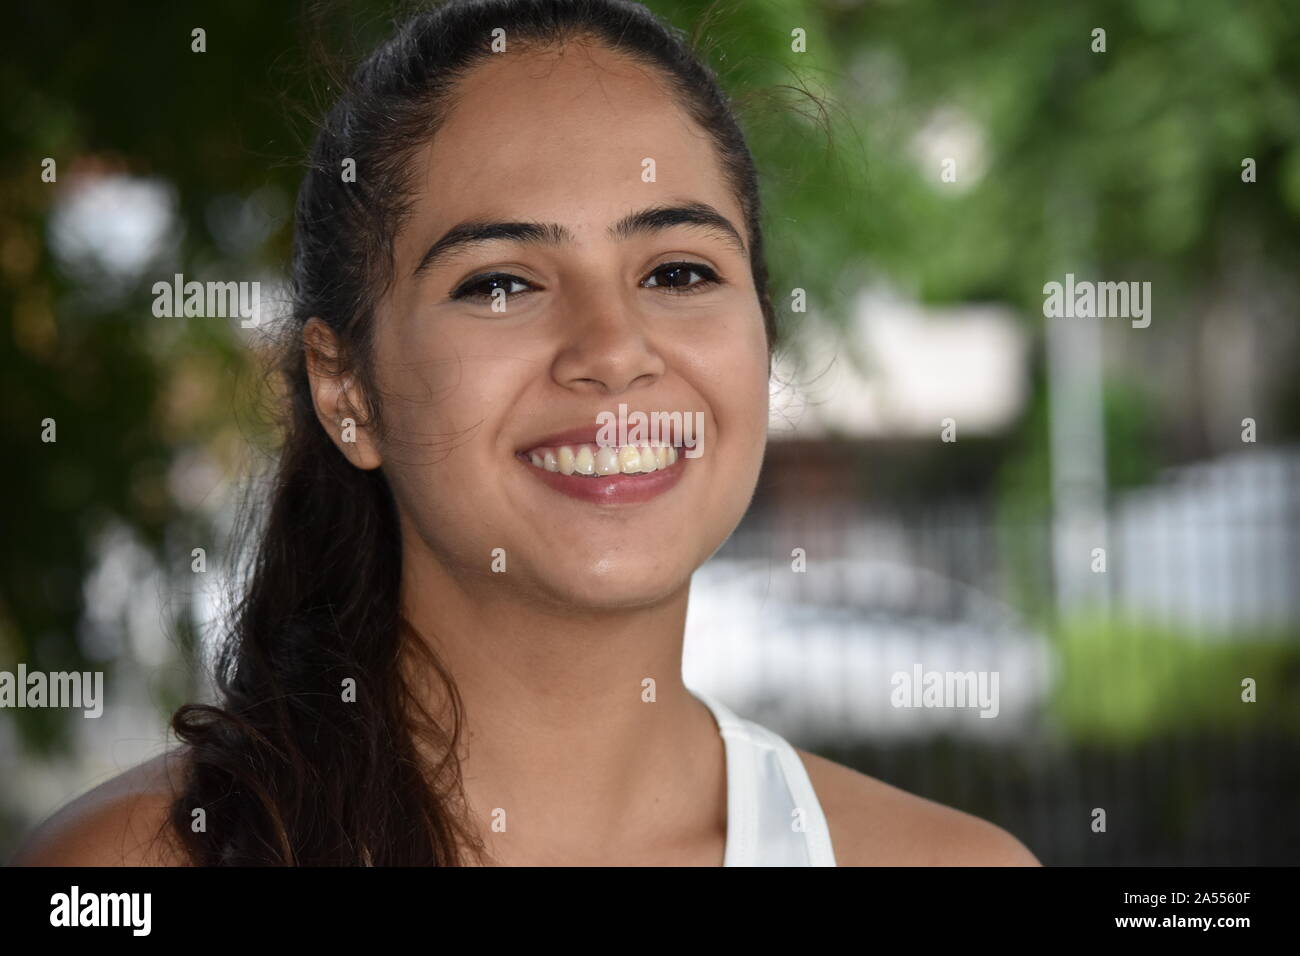 Smiling Cute Colombian Girl Stock Photo - Alamy